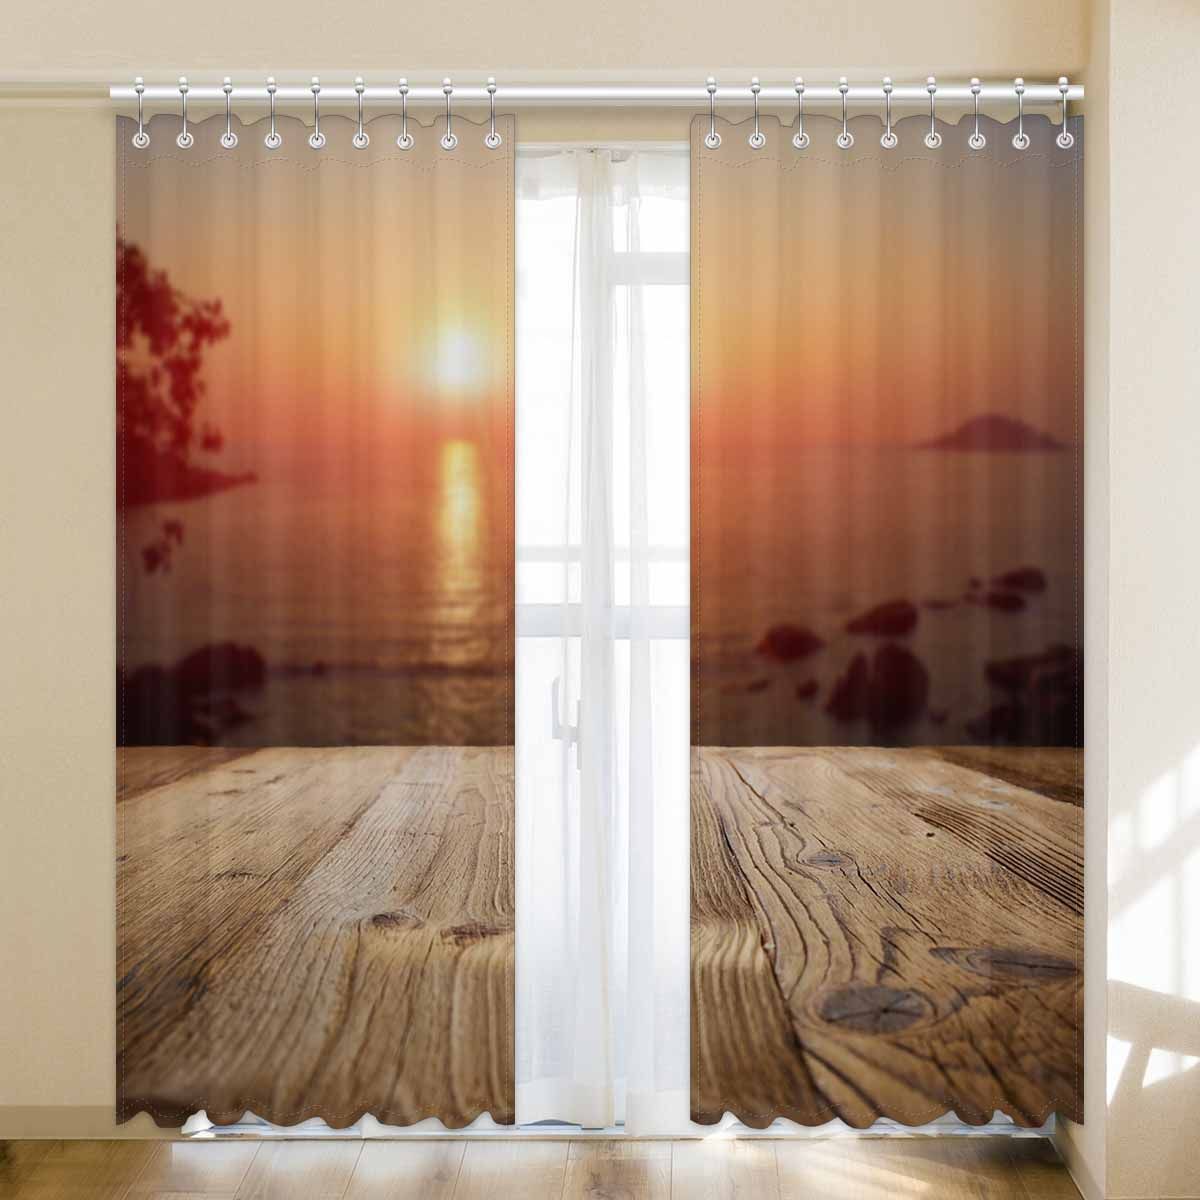 woden table on the beach with palms printed window curtain 4113